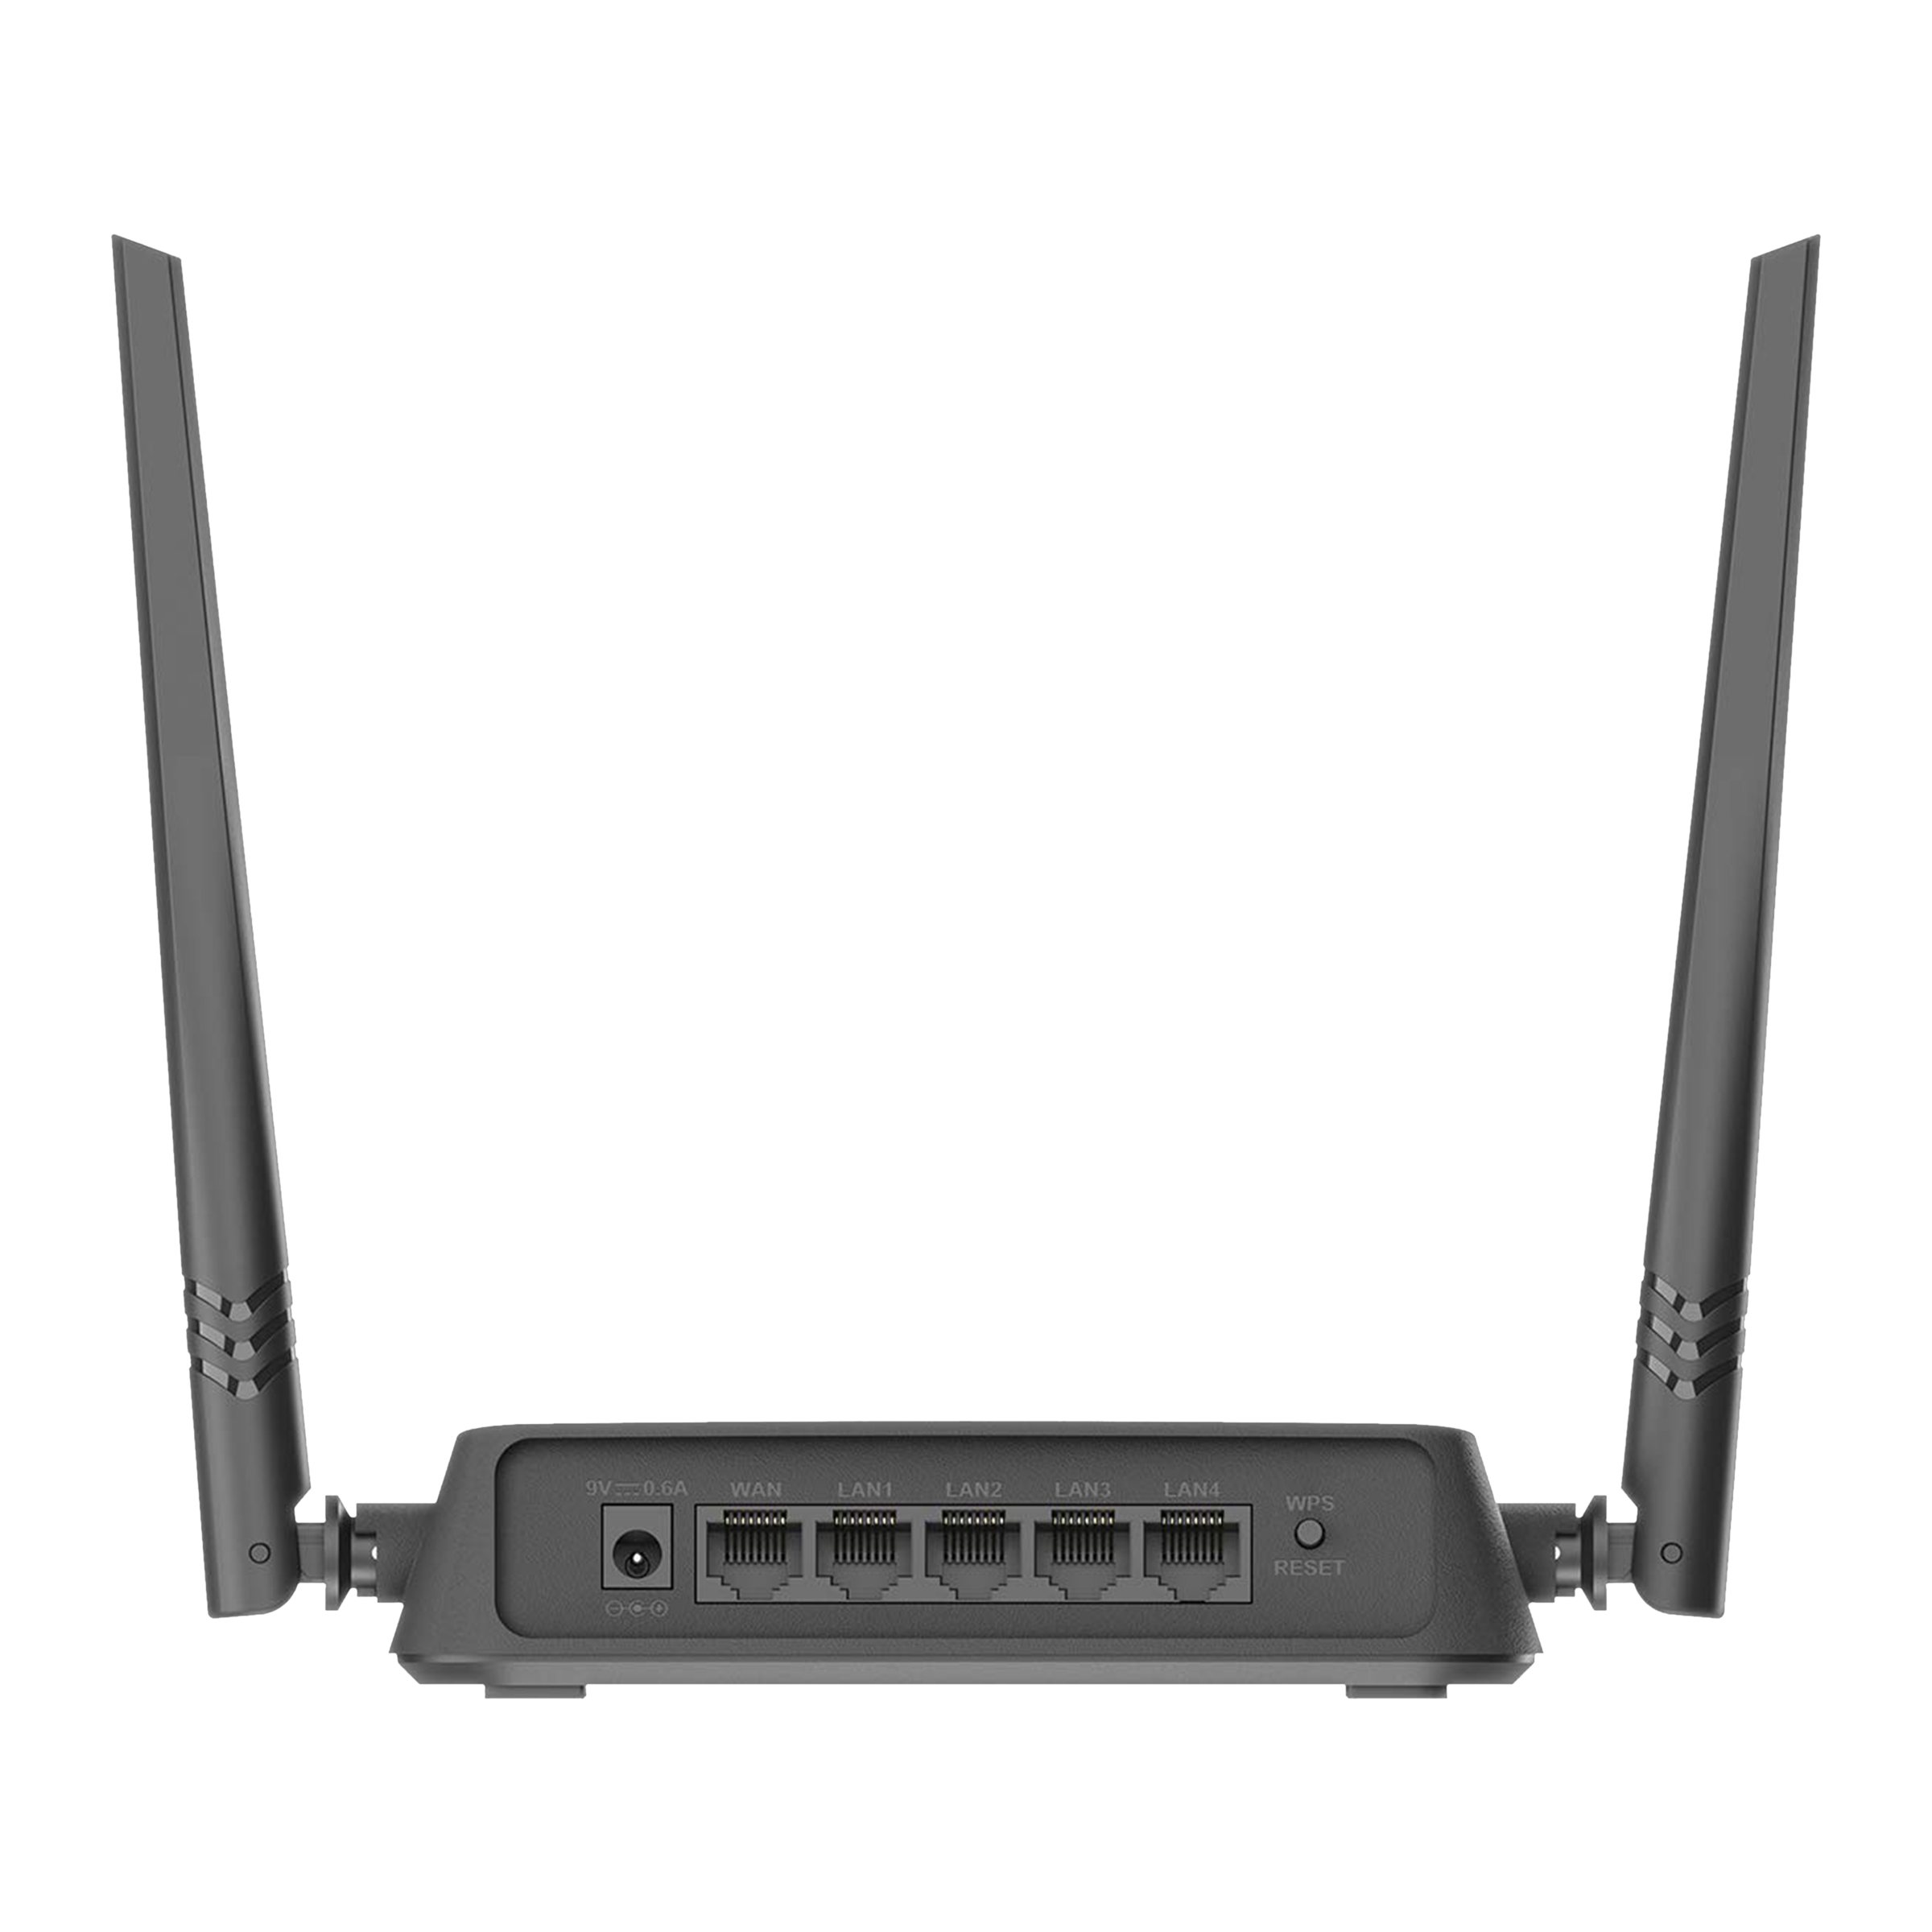 D-Link N300 Single Band 300 Mbps WiFi Router (2 Antennas, 4 LAN Ports, Wireless Guest Zone, DIR-615, Black)_2